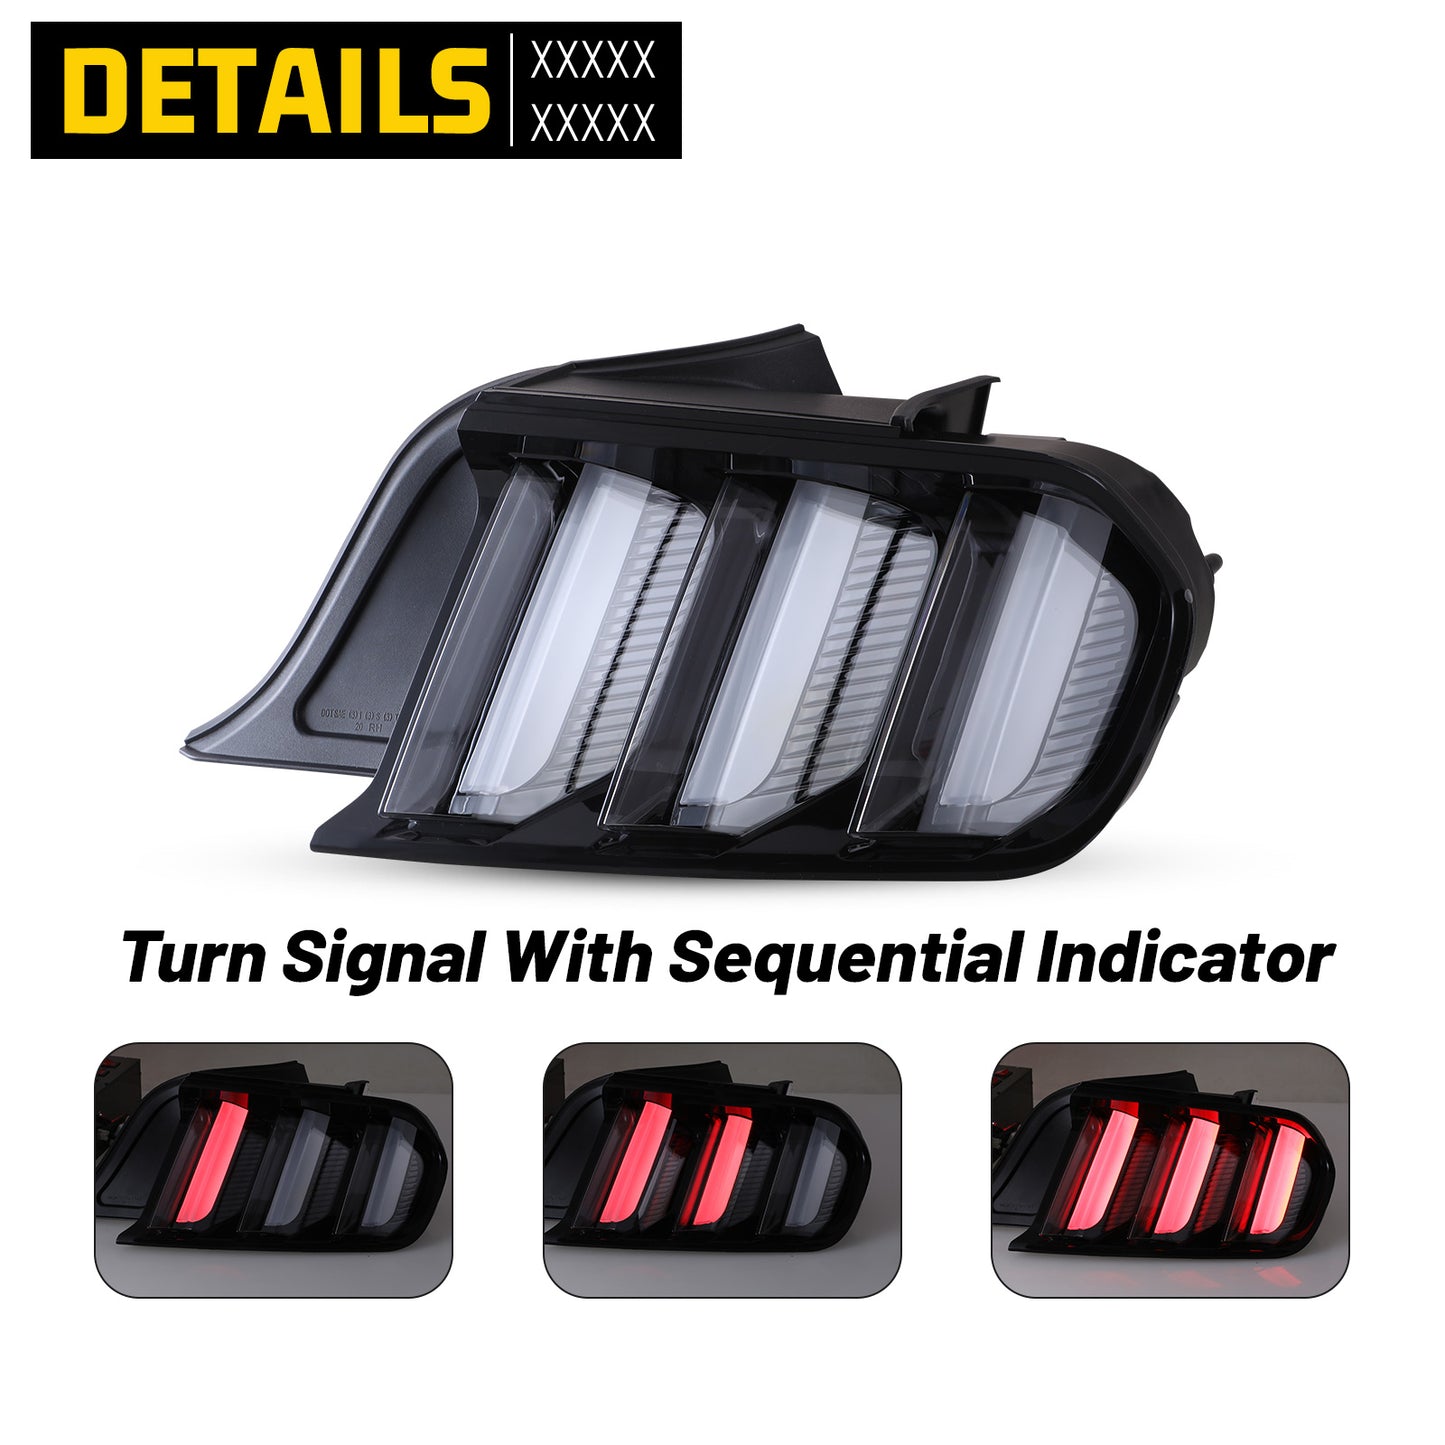 2015-2023 Ford Mustang Coupe & Convertible/2016-2020 Ford Mustang Shelby GT350/2020-2023 Ford Mustang Shelby GT500 Sequential LED Tail Light - Glossy Black / Clear